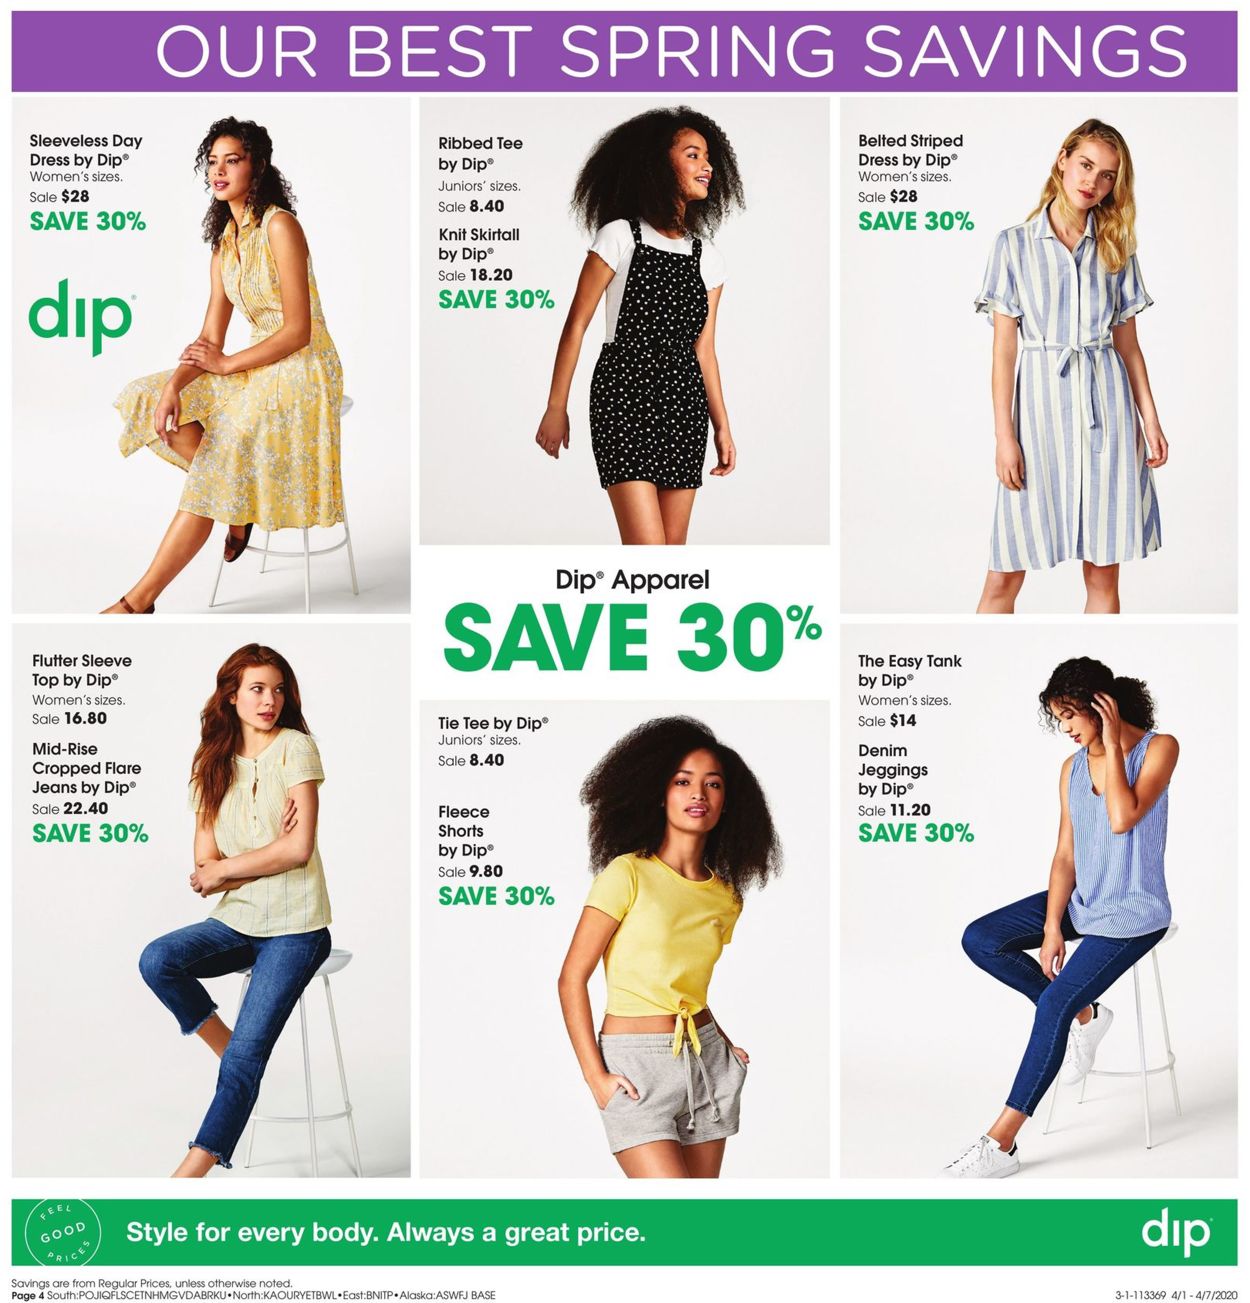 Fred Meyer Weekly Ad Circular - valid 04/01-04/07/2020 (Page 4)